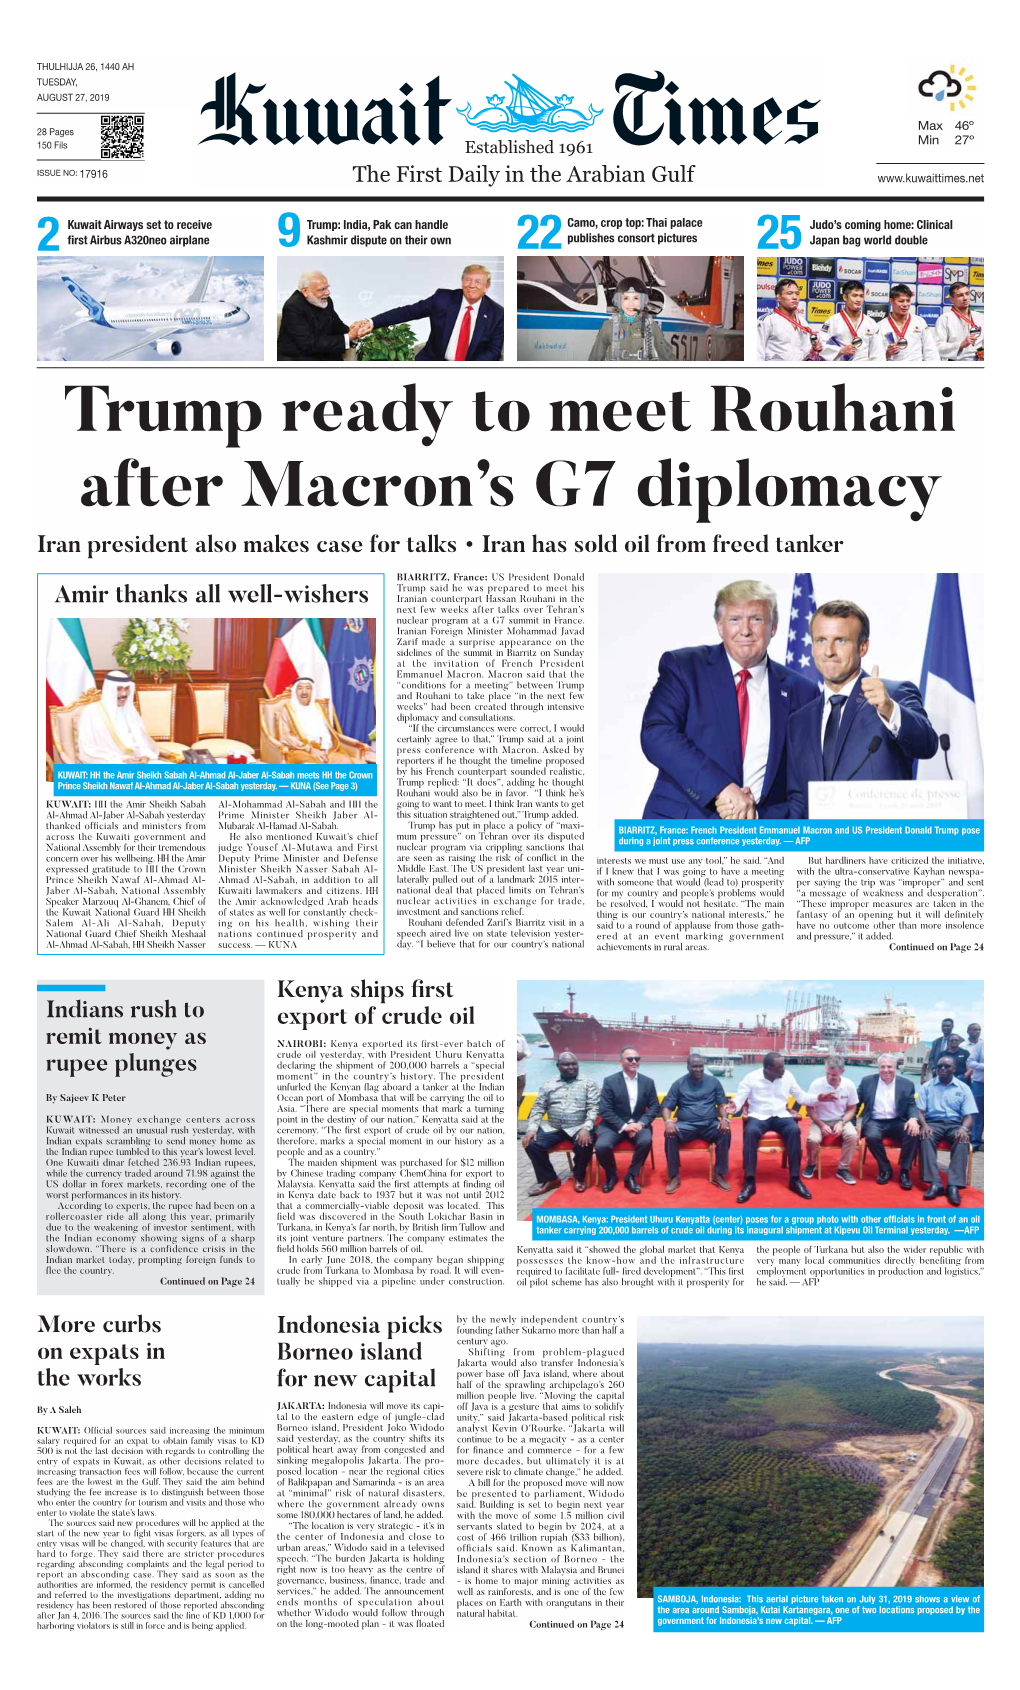 Trump Ready to Meet Rouhani After Macron's G7 Diplomacy